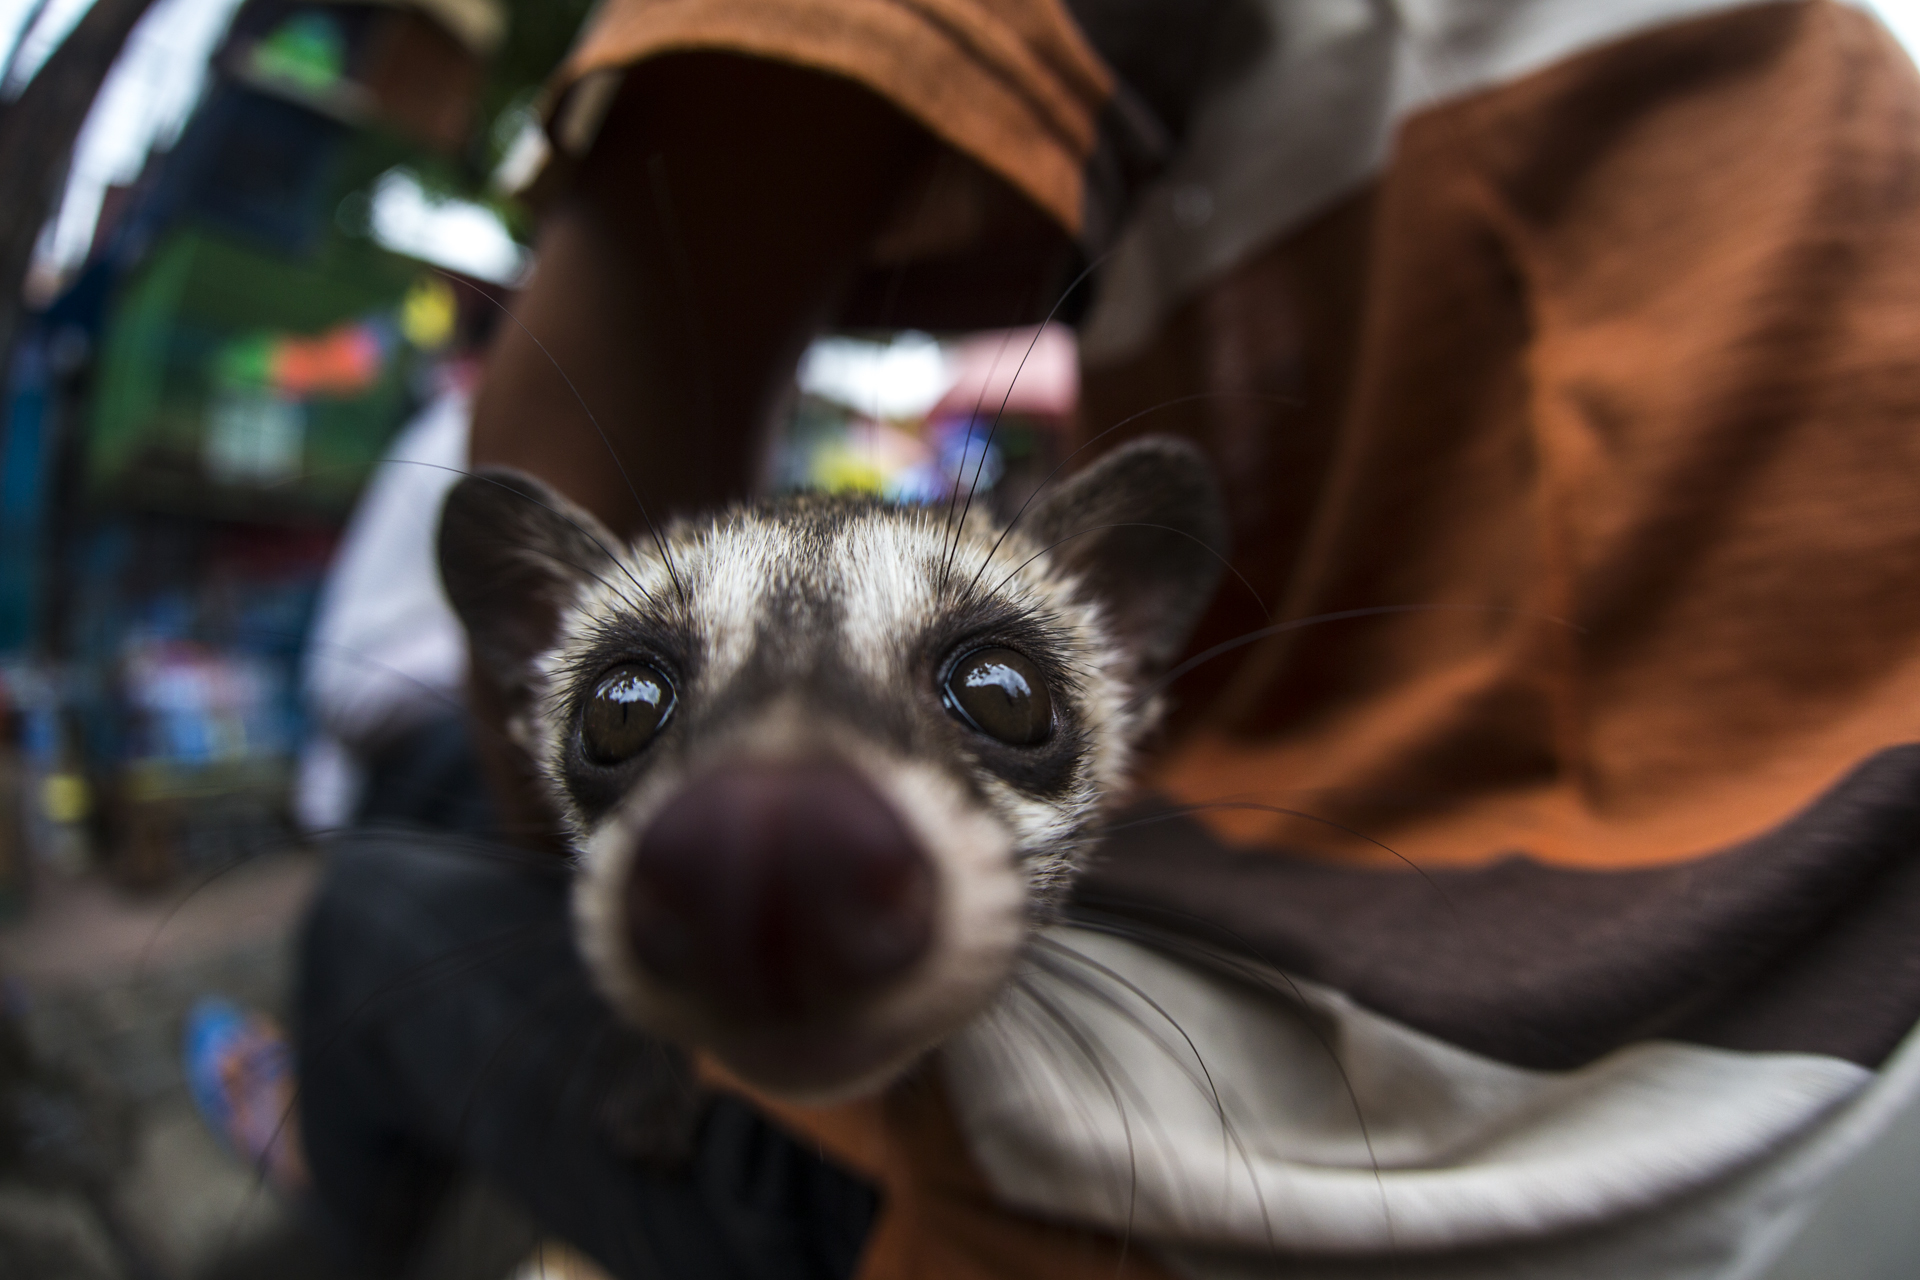  A market trader showcased each of his 'products' by taking them out of their cages and holding them, showing them off to potential buyers. Species such as this palm civet were for sale.&nbsp; 